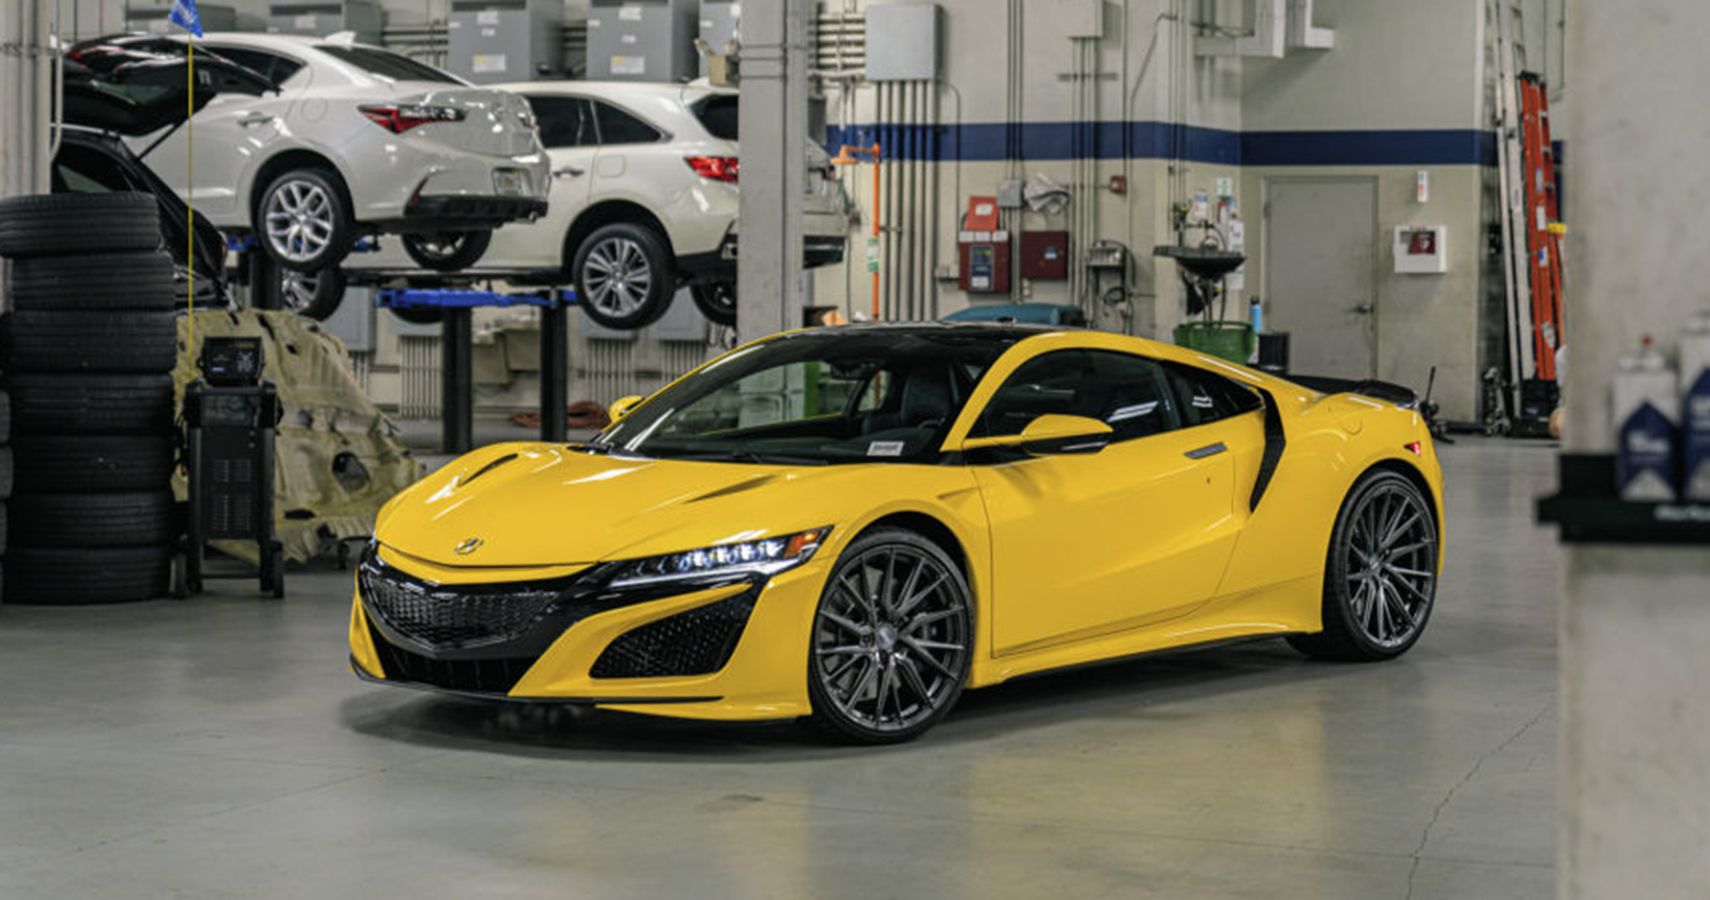 Check Out This Exclusive Acura NSX For Sale At A Florida Dealership